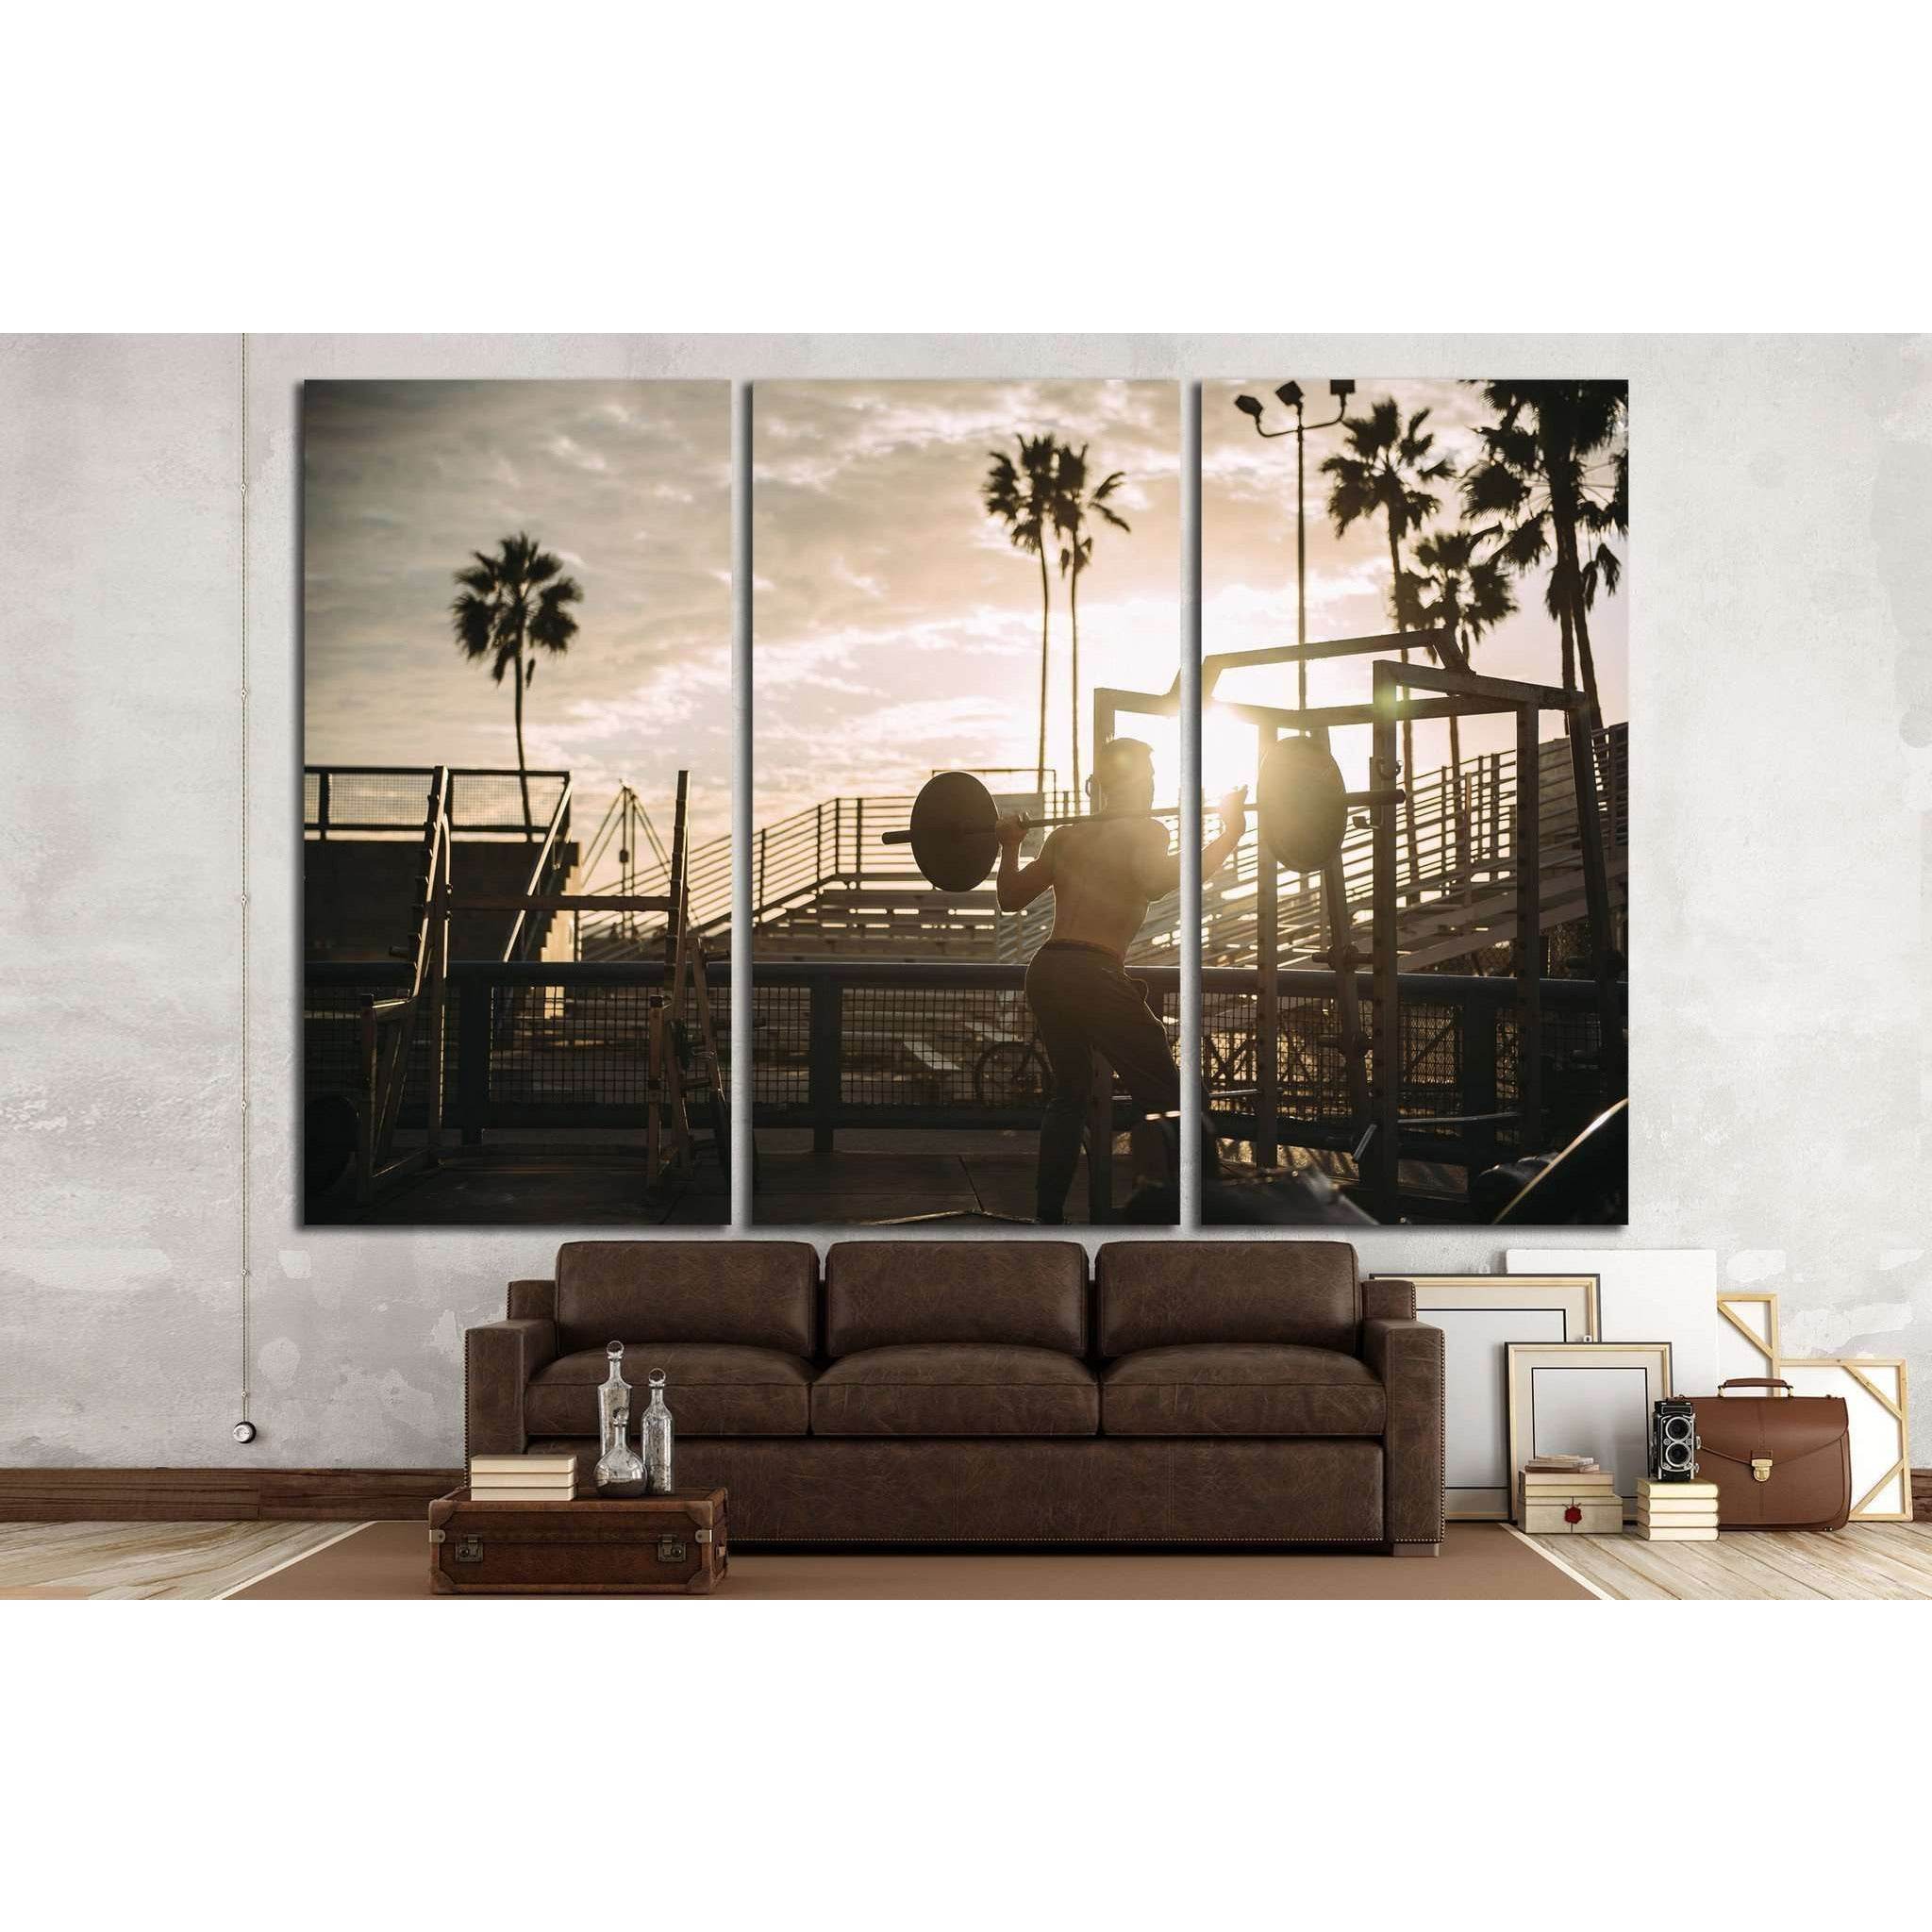 Training №1460 Ready to Hang Canvas Print